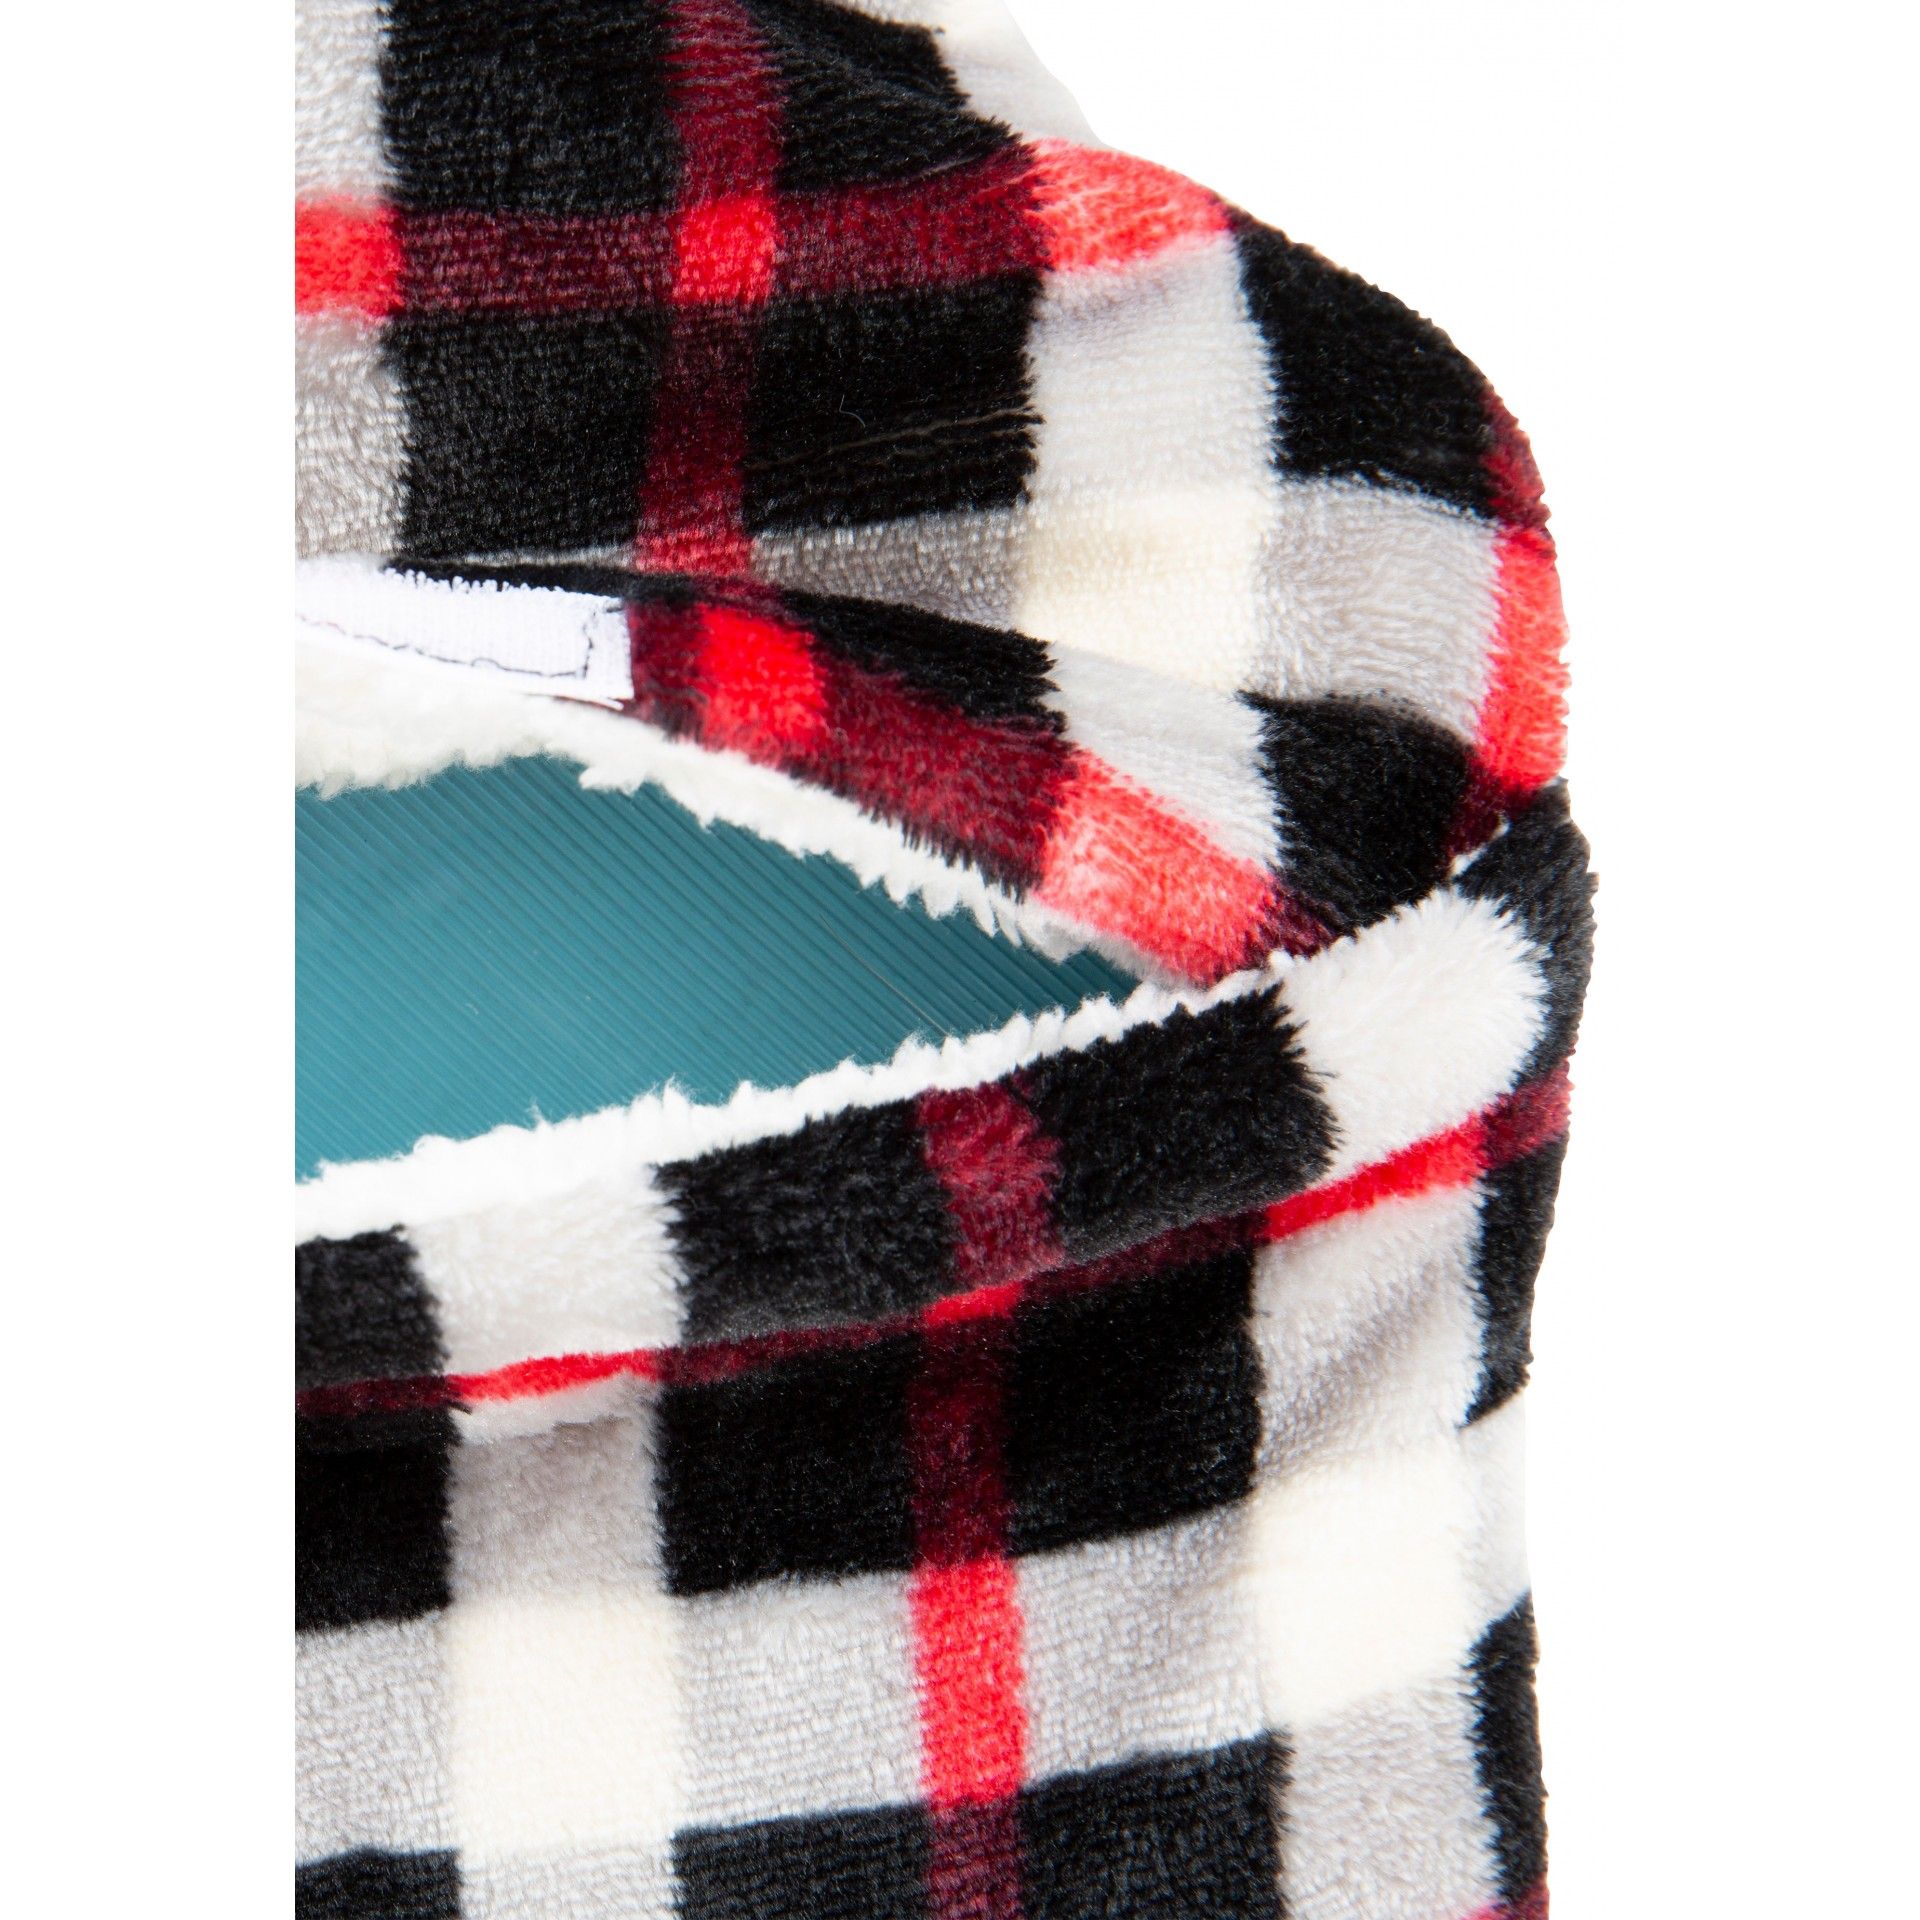 PVC hot water bottle. 2L capacity. 100% polyester cover. Sherpa fleece cover. Gift packaging. WARNING - HOT WATER BOTTLES CAN CAUSE BURNS. AVOID PROLONGED DIRECT CONTACT WITH THE SKIN.